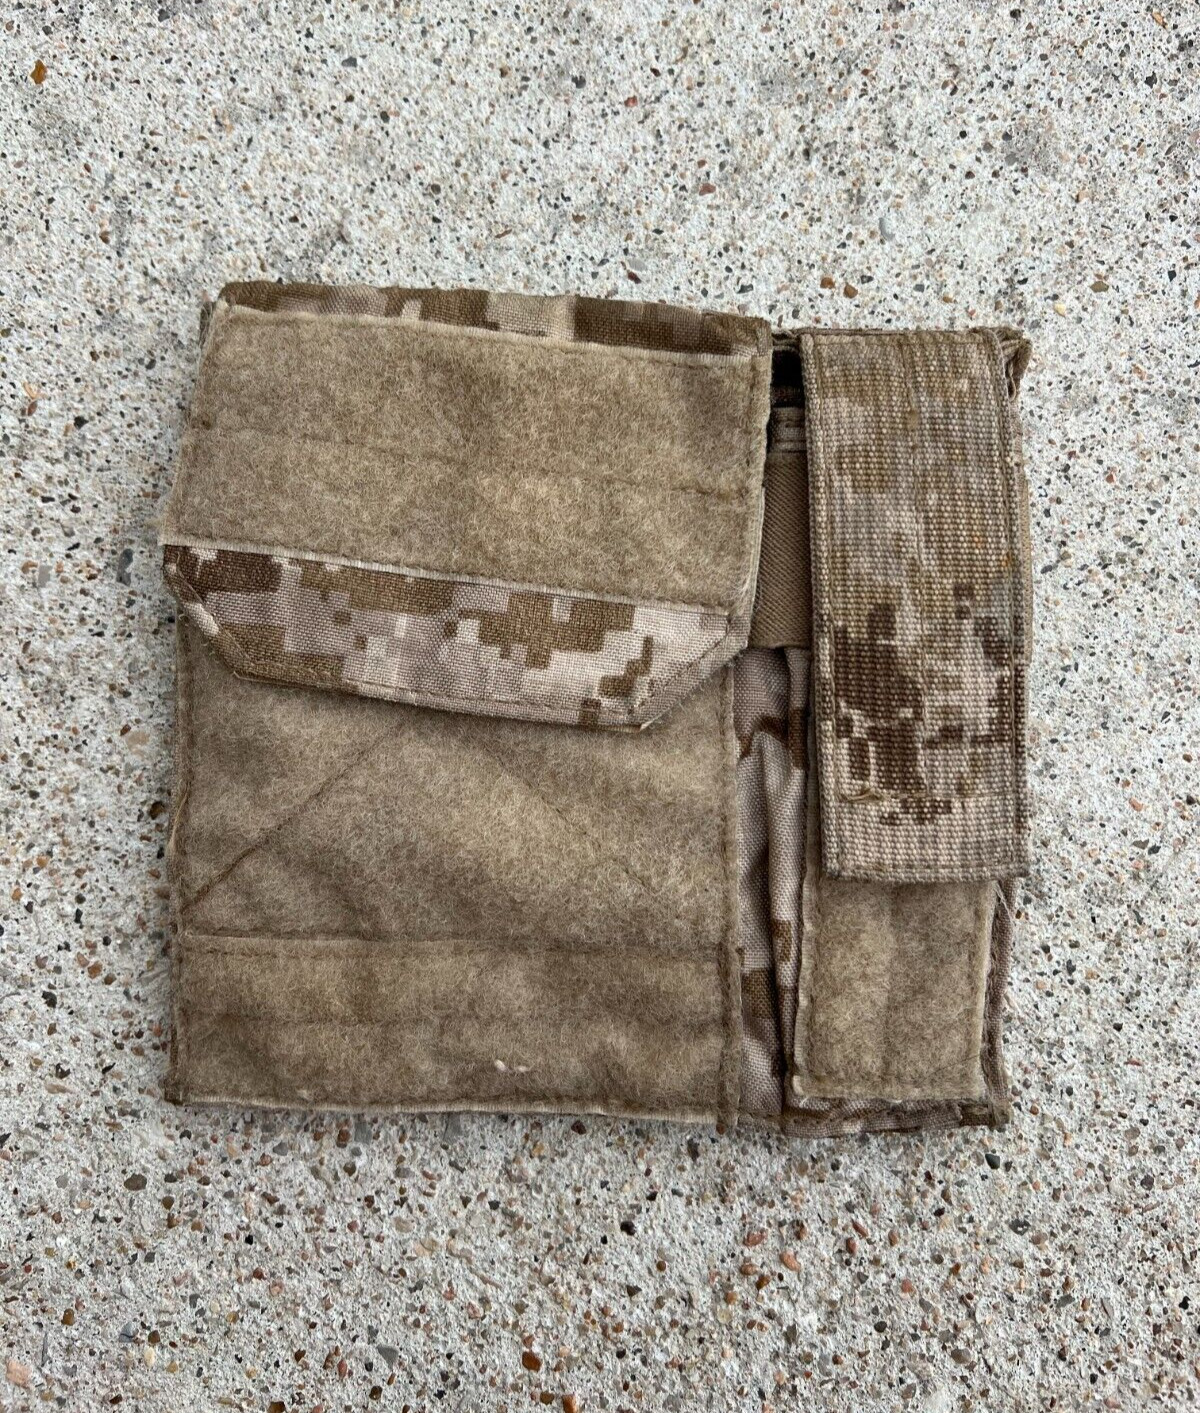 D marked 2008 Eagle AOR1 Admin Pouch with Light pocket OLDSCHOOL SEALS DEVGRU